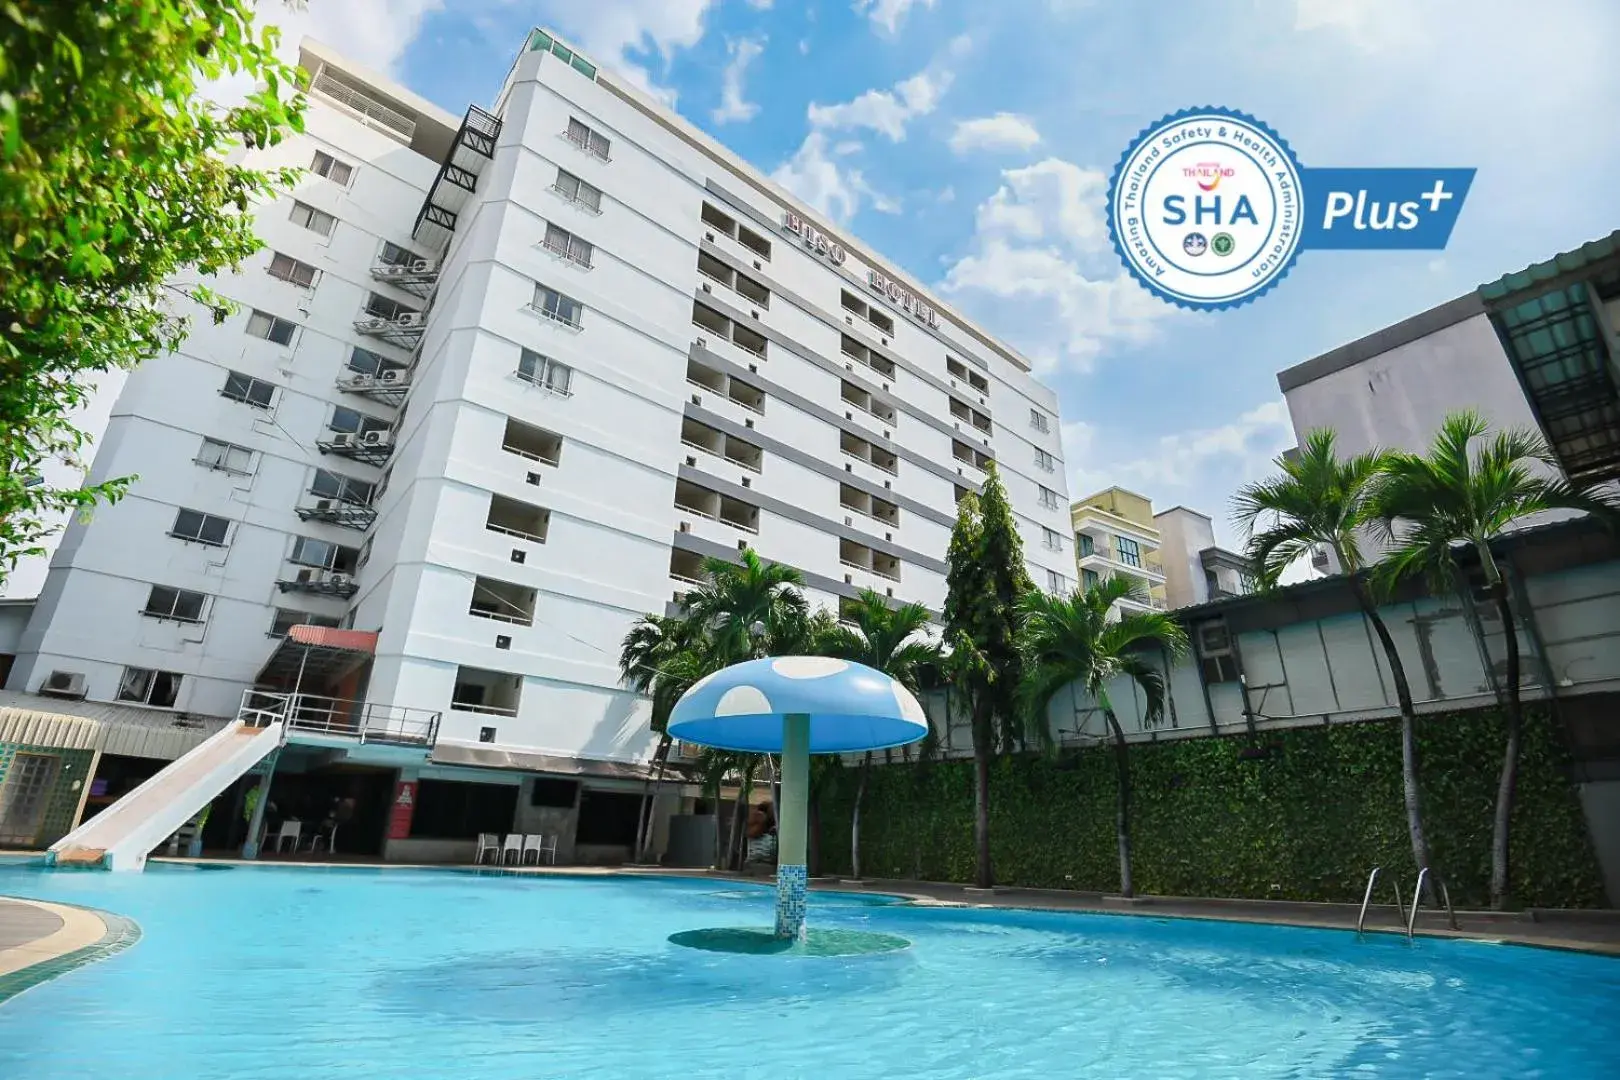 Property building, Swimming Pool in Pattaya Hiso Hotel